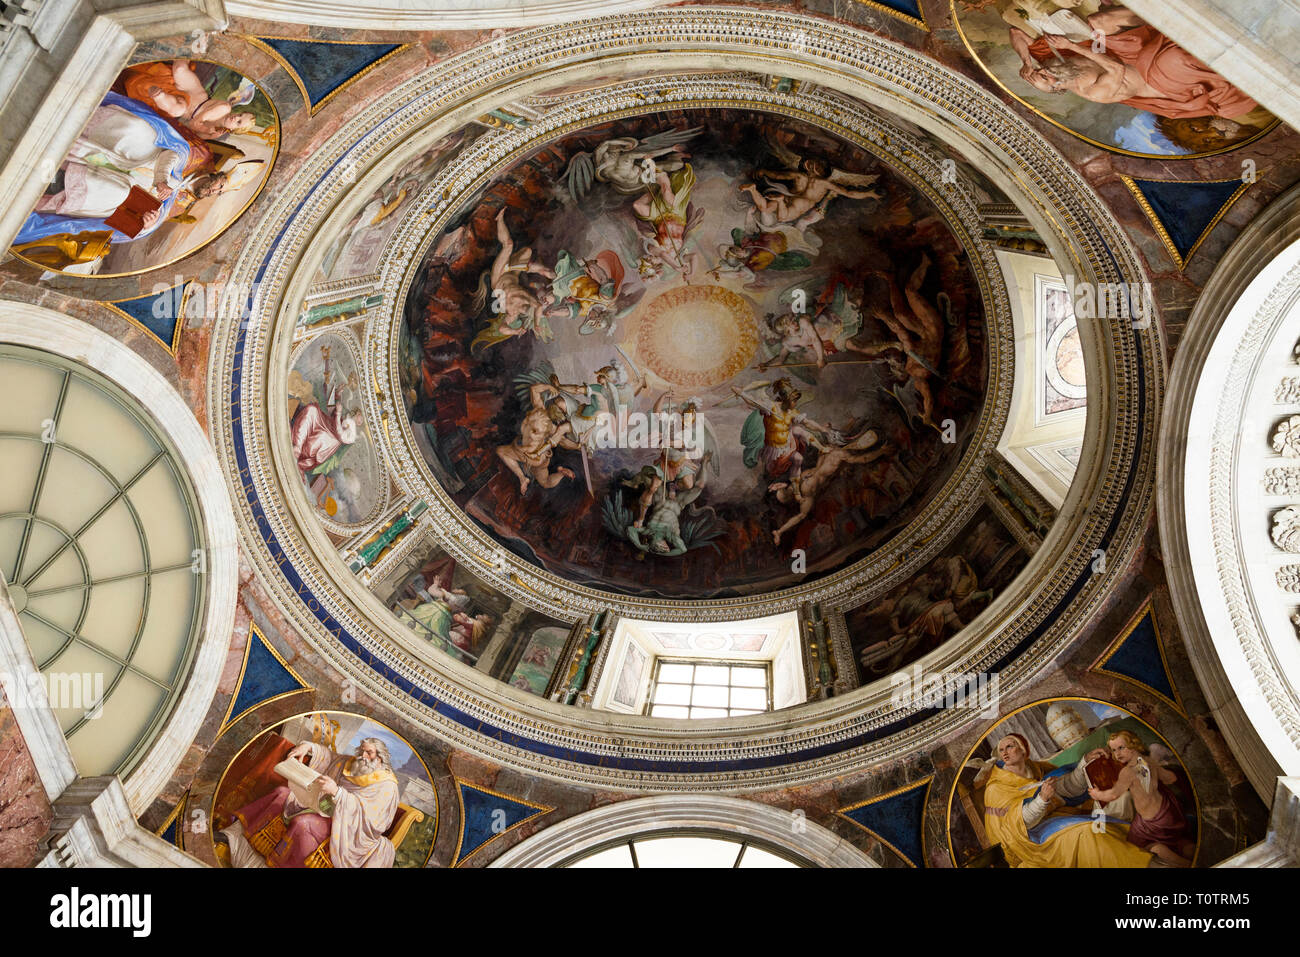 Seven Devils Painted On The Dome Of The Chapel In The House Of Saint Pius V Vatican City Rome Depicts A Raging Battle Between Heaven And Hell Stock Photo Alamy